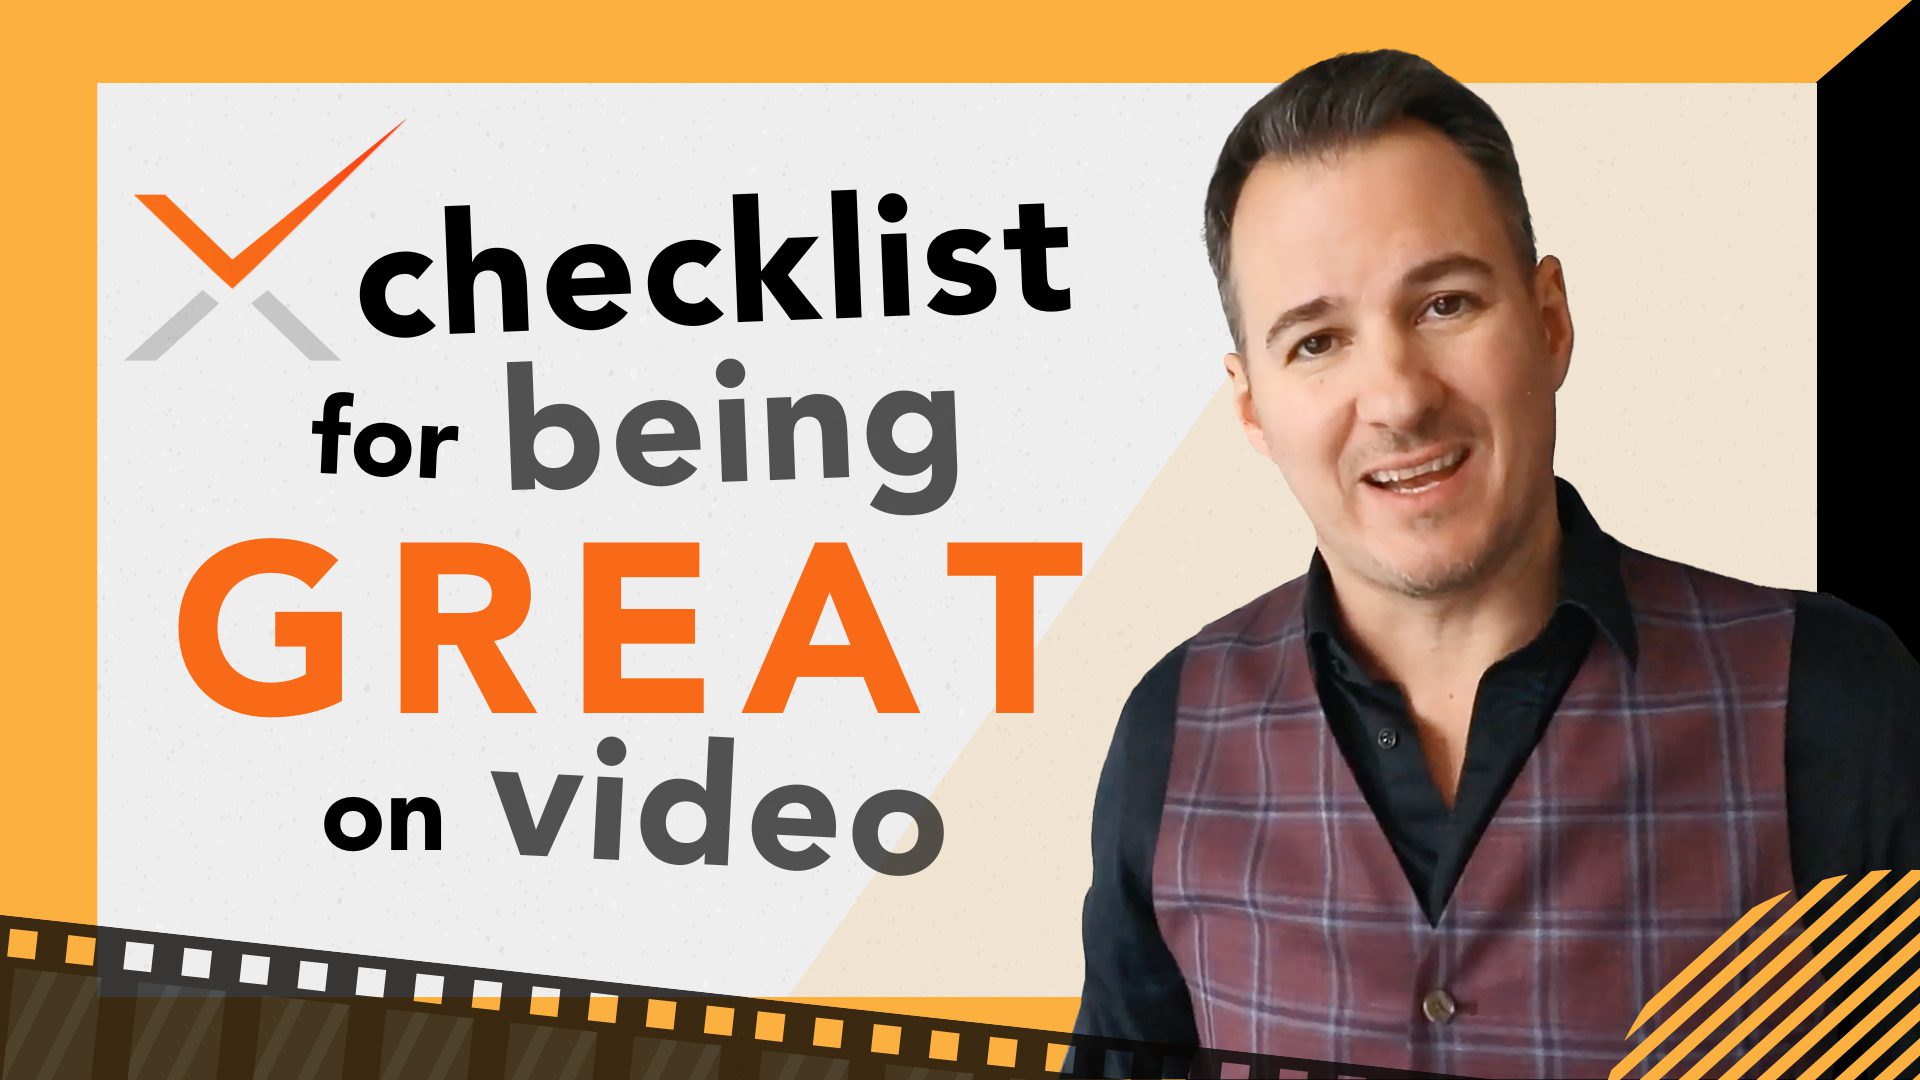 Checklist How To Direct a Person to be Great on Video